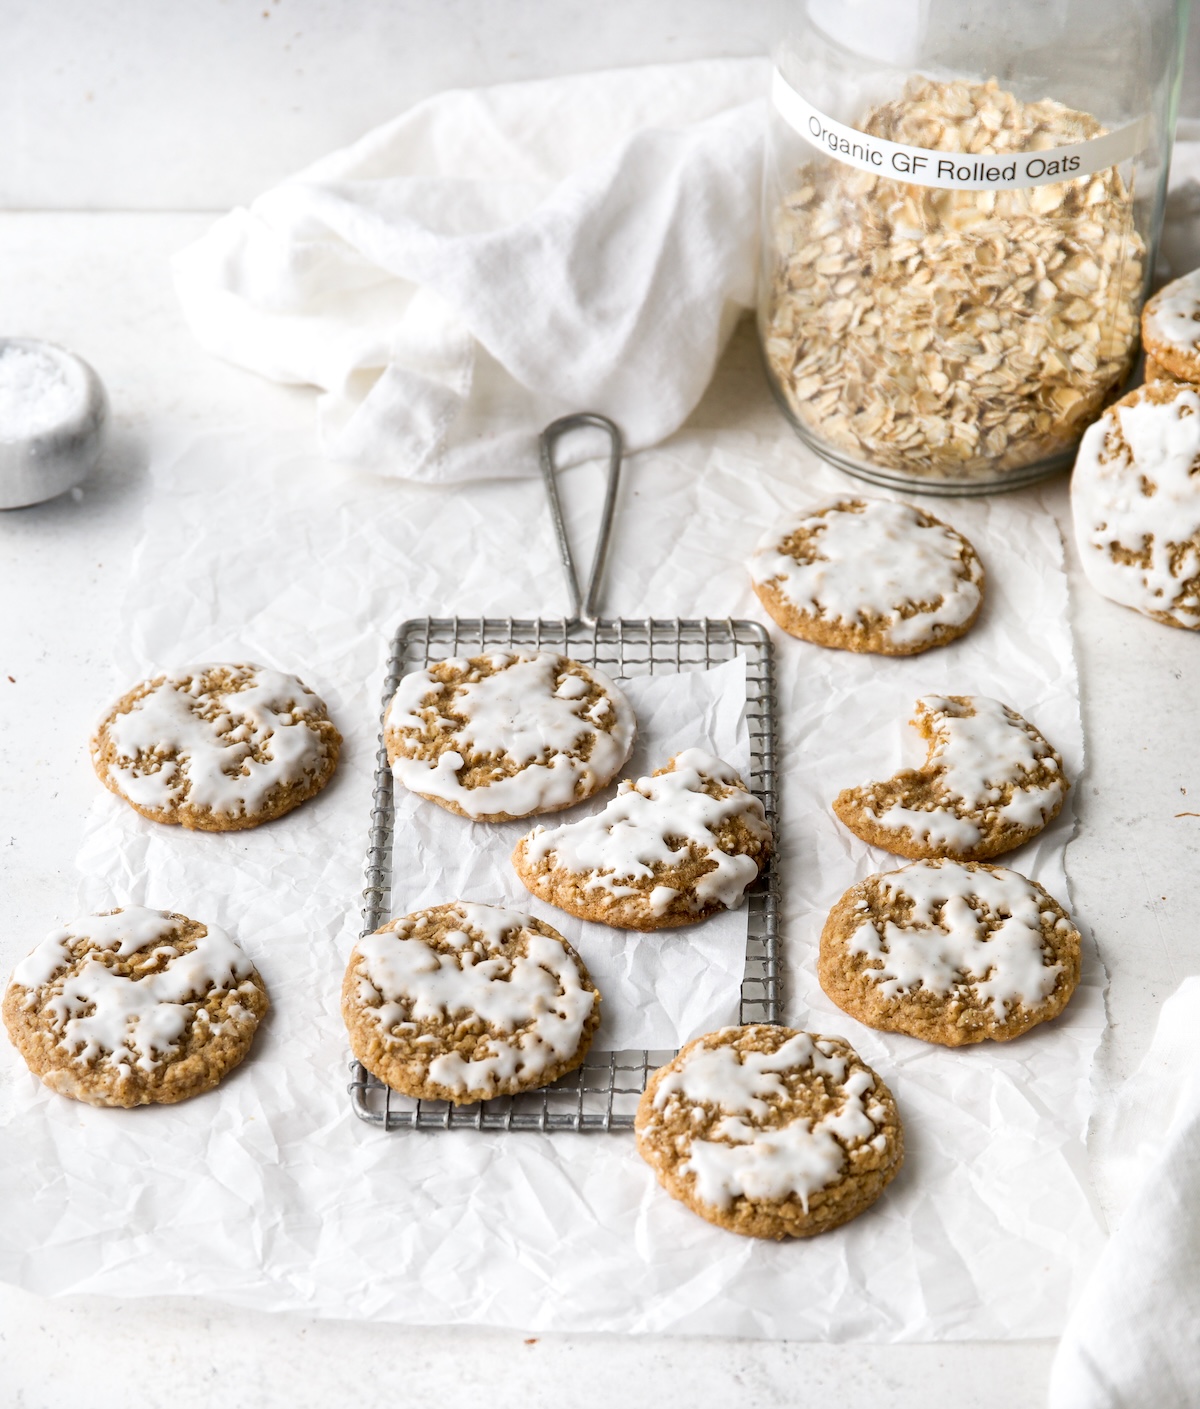 Iced oatmeal cookies on a white surface.